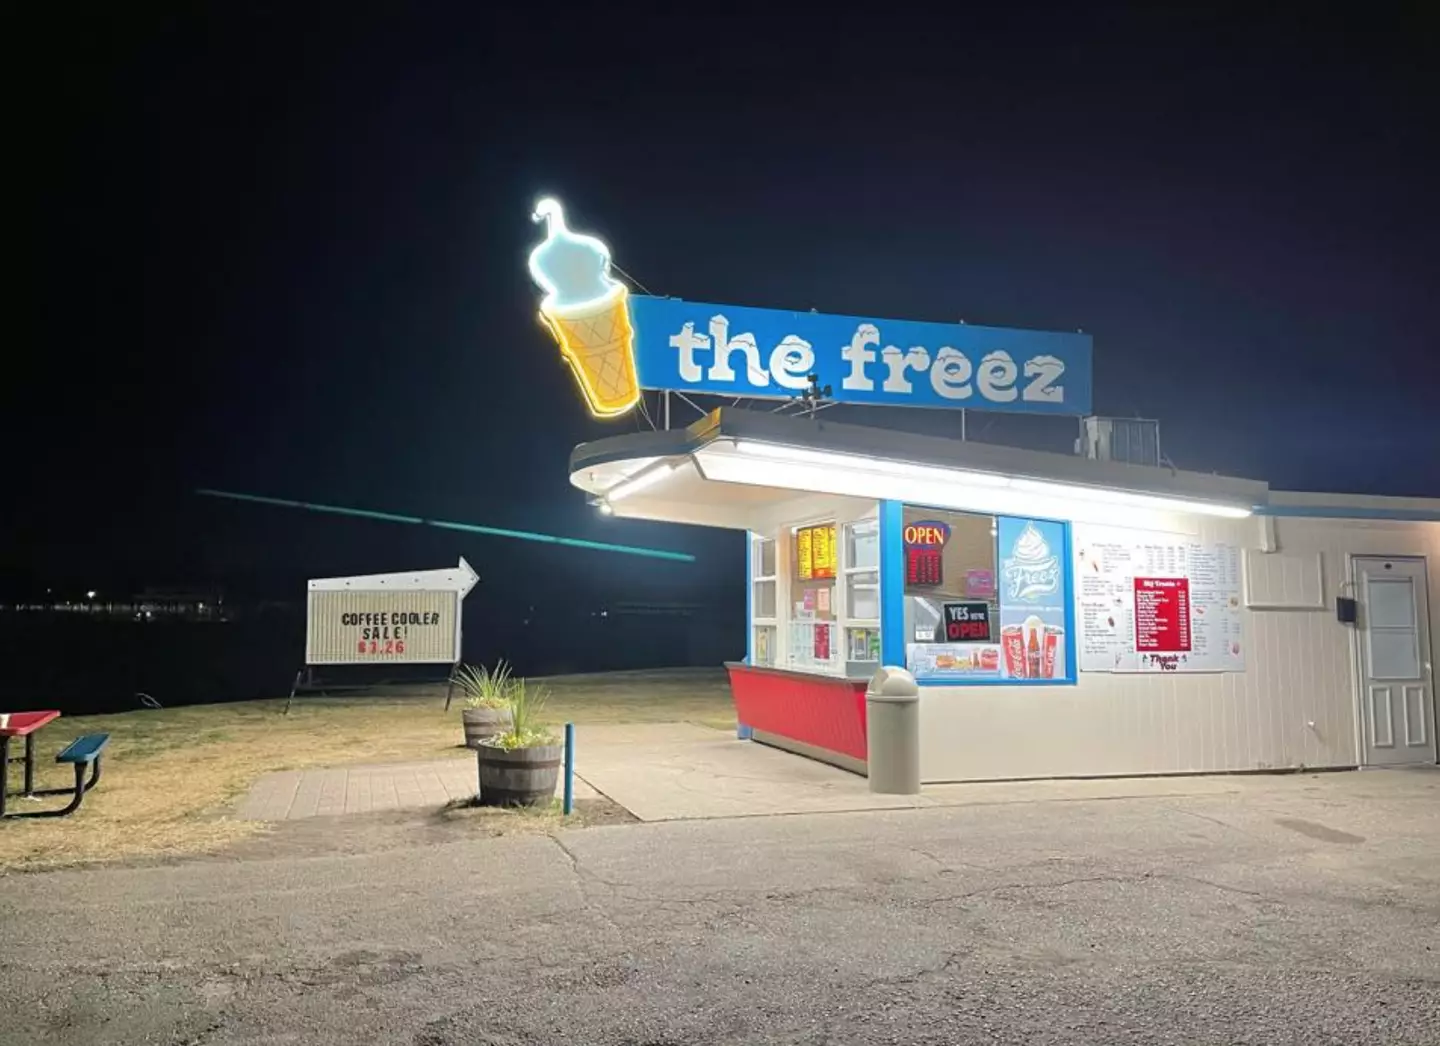 An employee of The Moorhead Freez was allegedly fired after receiving a $100 tip from a customer (Facebook/Moorhead Freez)